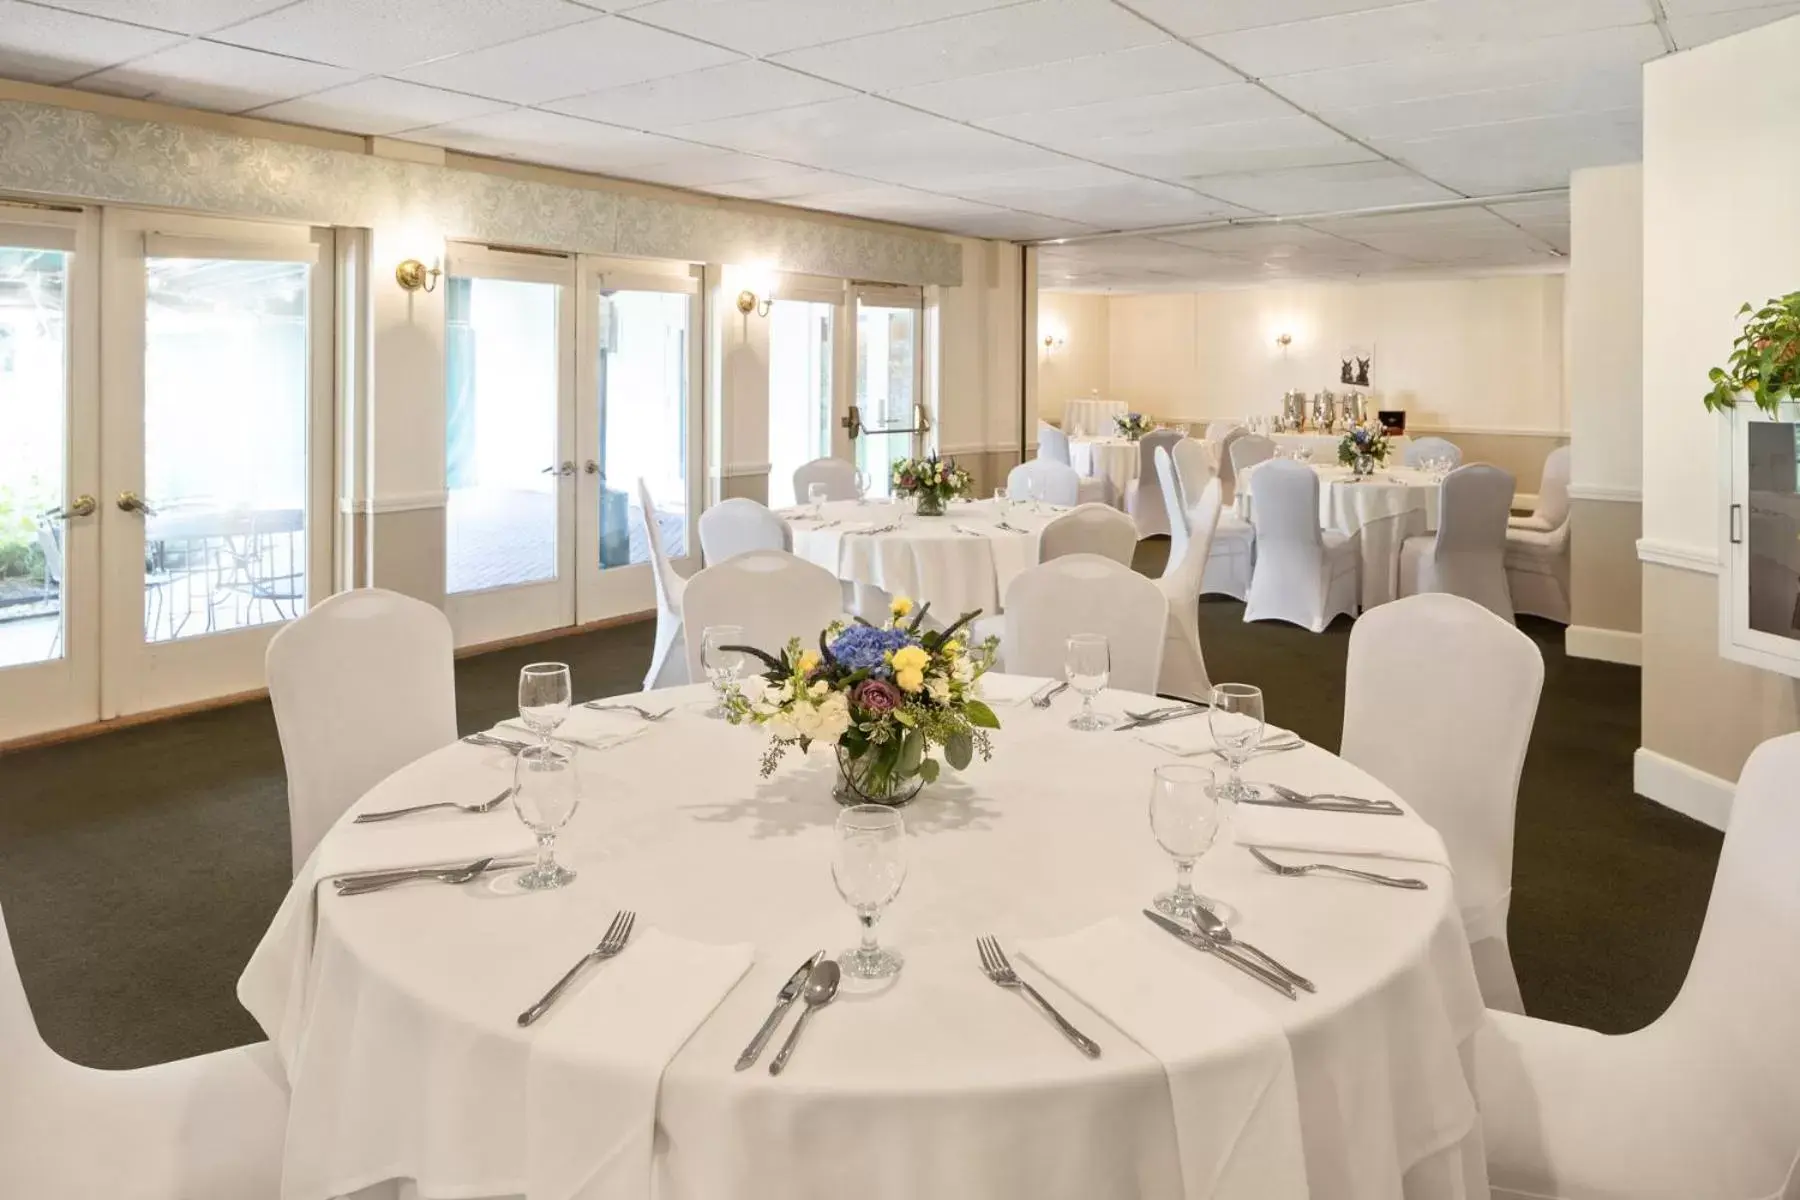 Meeting/conference room, Banquet Facilities in The Harraseeket Inn & Suites